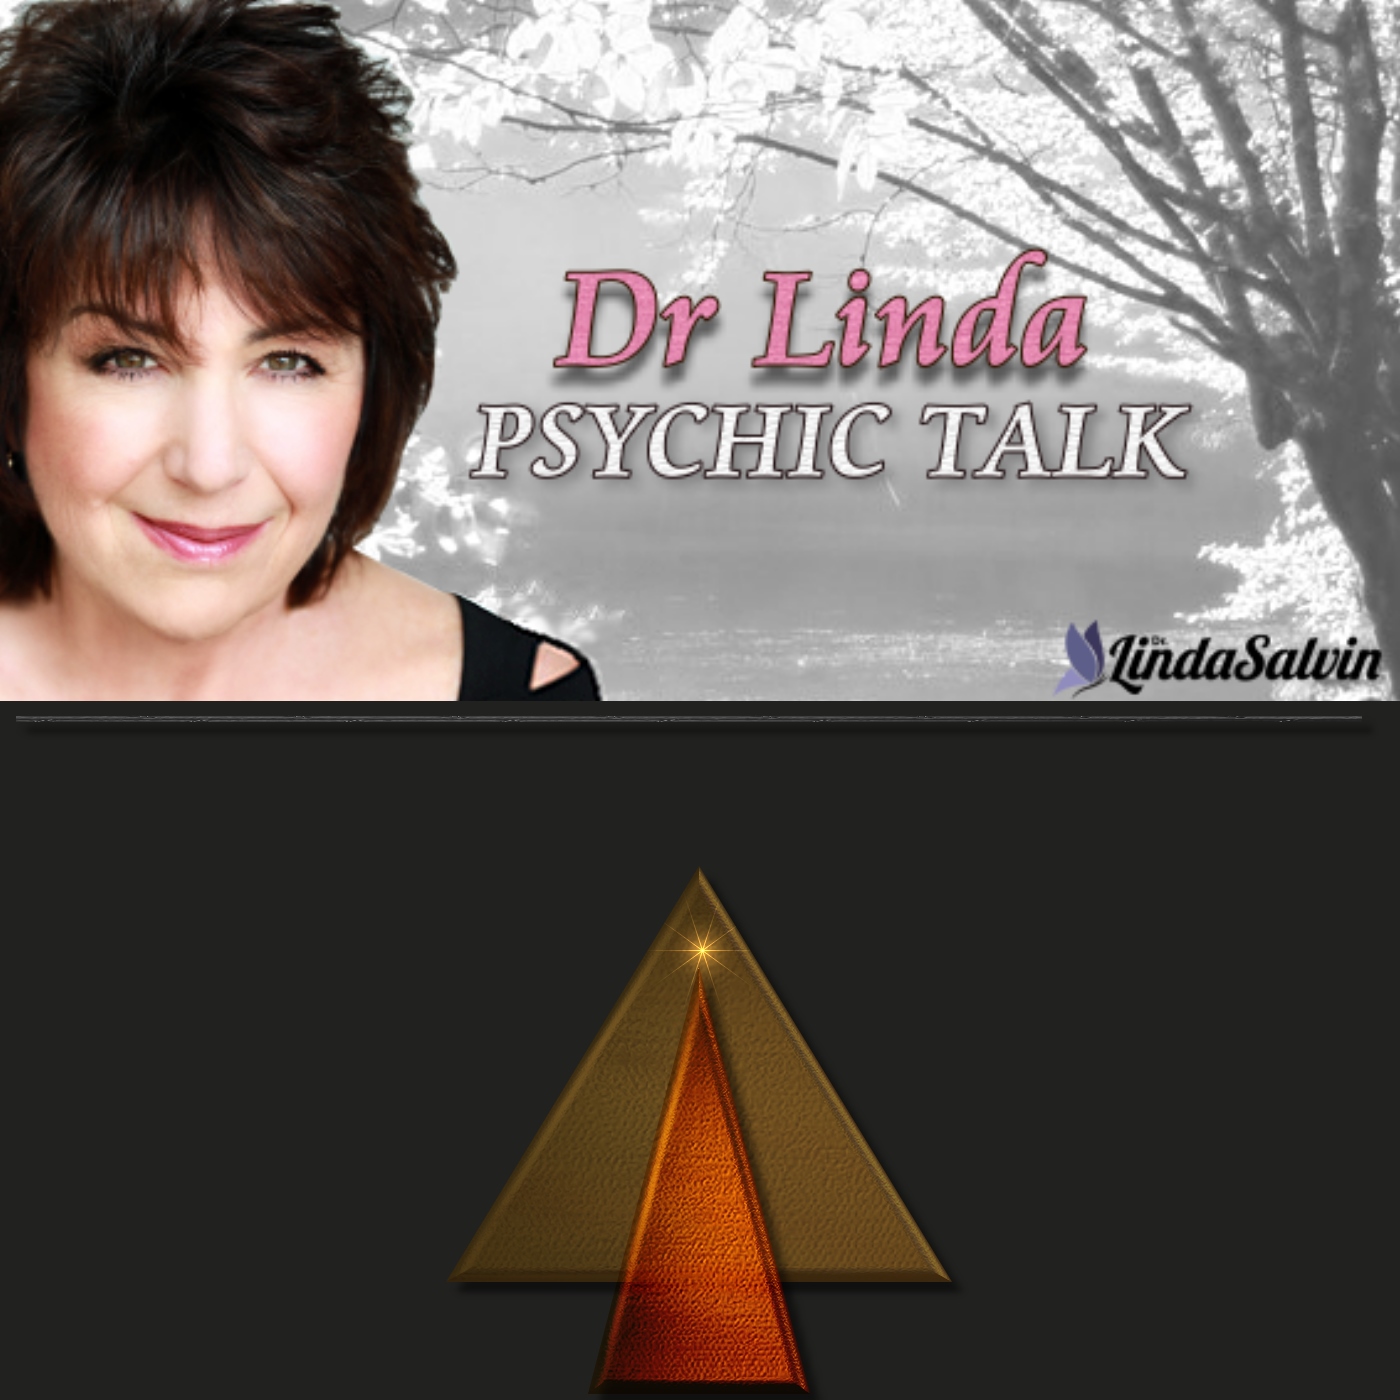 Dr Linda Psychic Talk with Dr Linda Salvin RSS Feed:BBS Radio, BBS Network Inc.